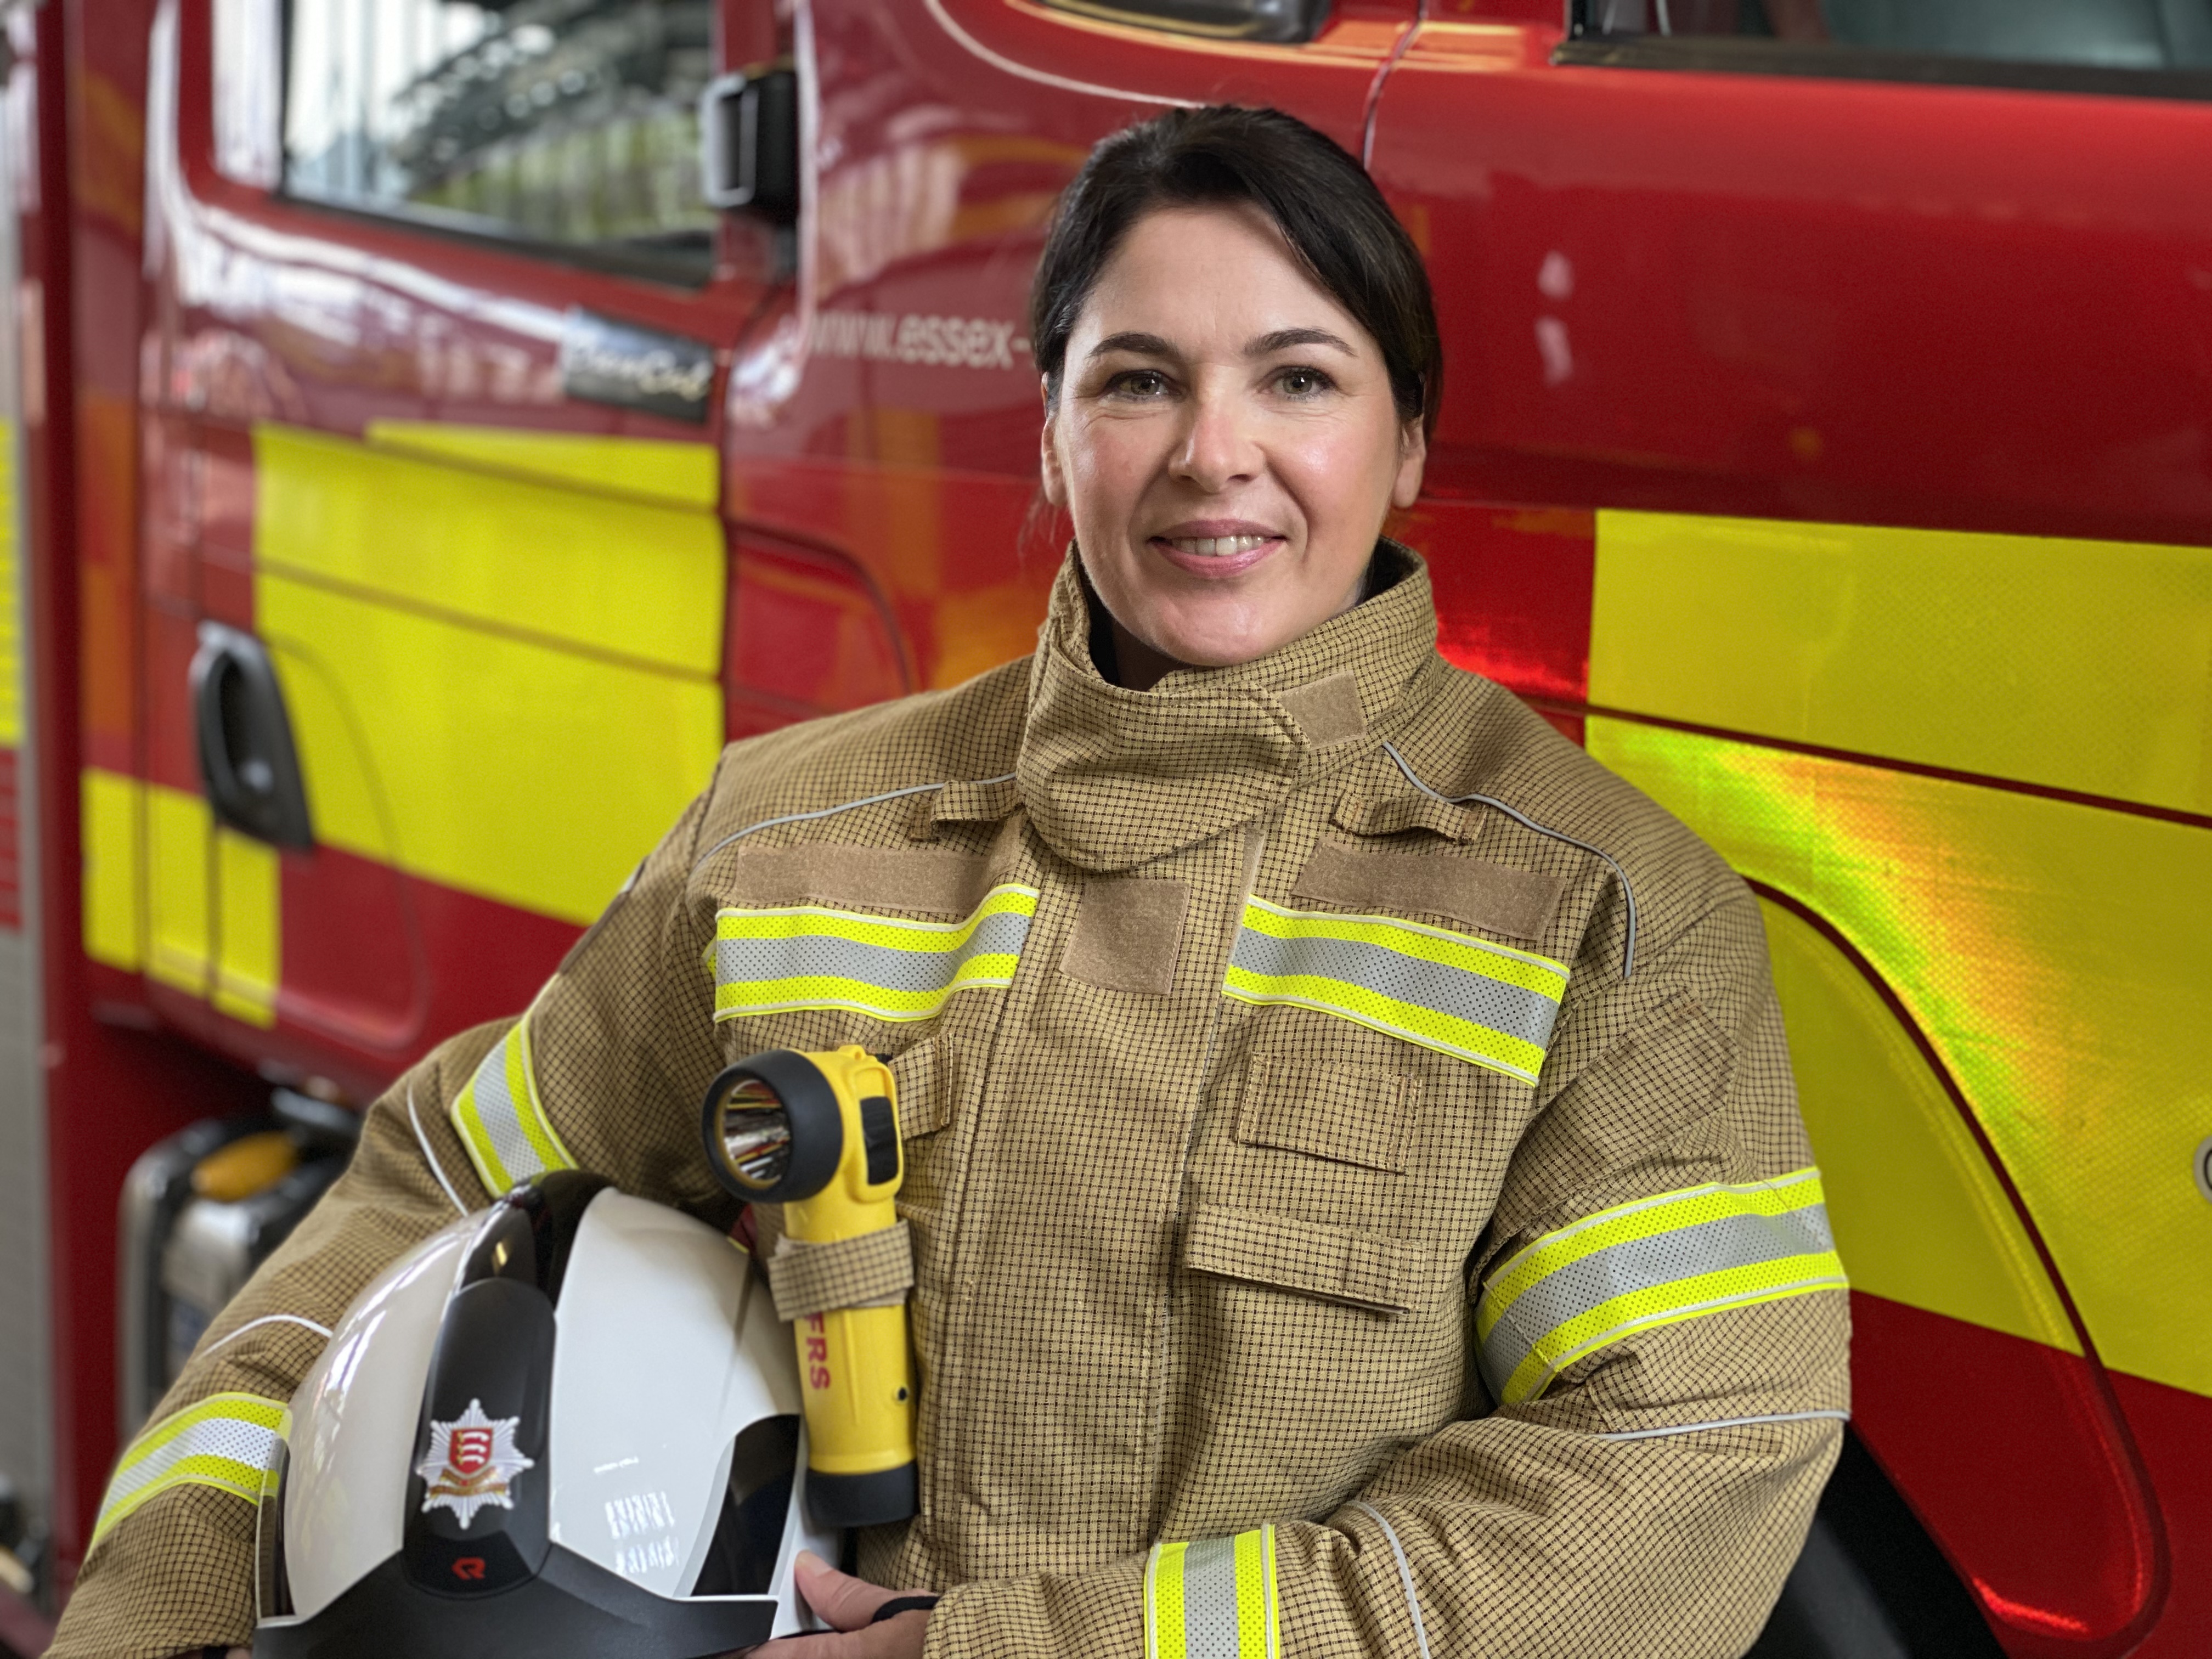 Our Deputy Chief Fire Officer Moira Bruin standing in front of a fire engine in her operational PPE. She is smiling.